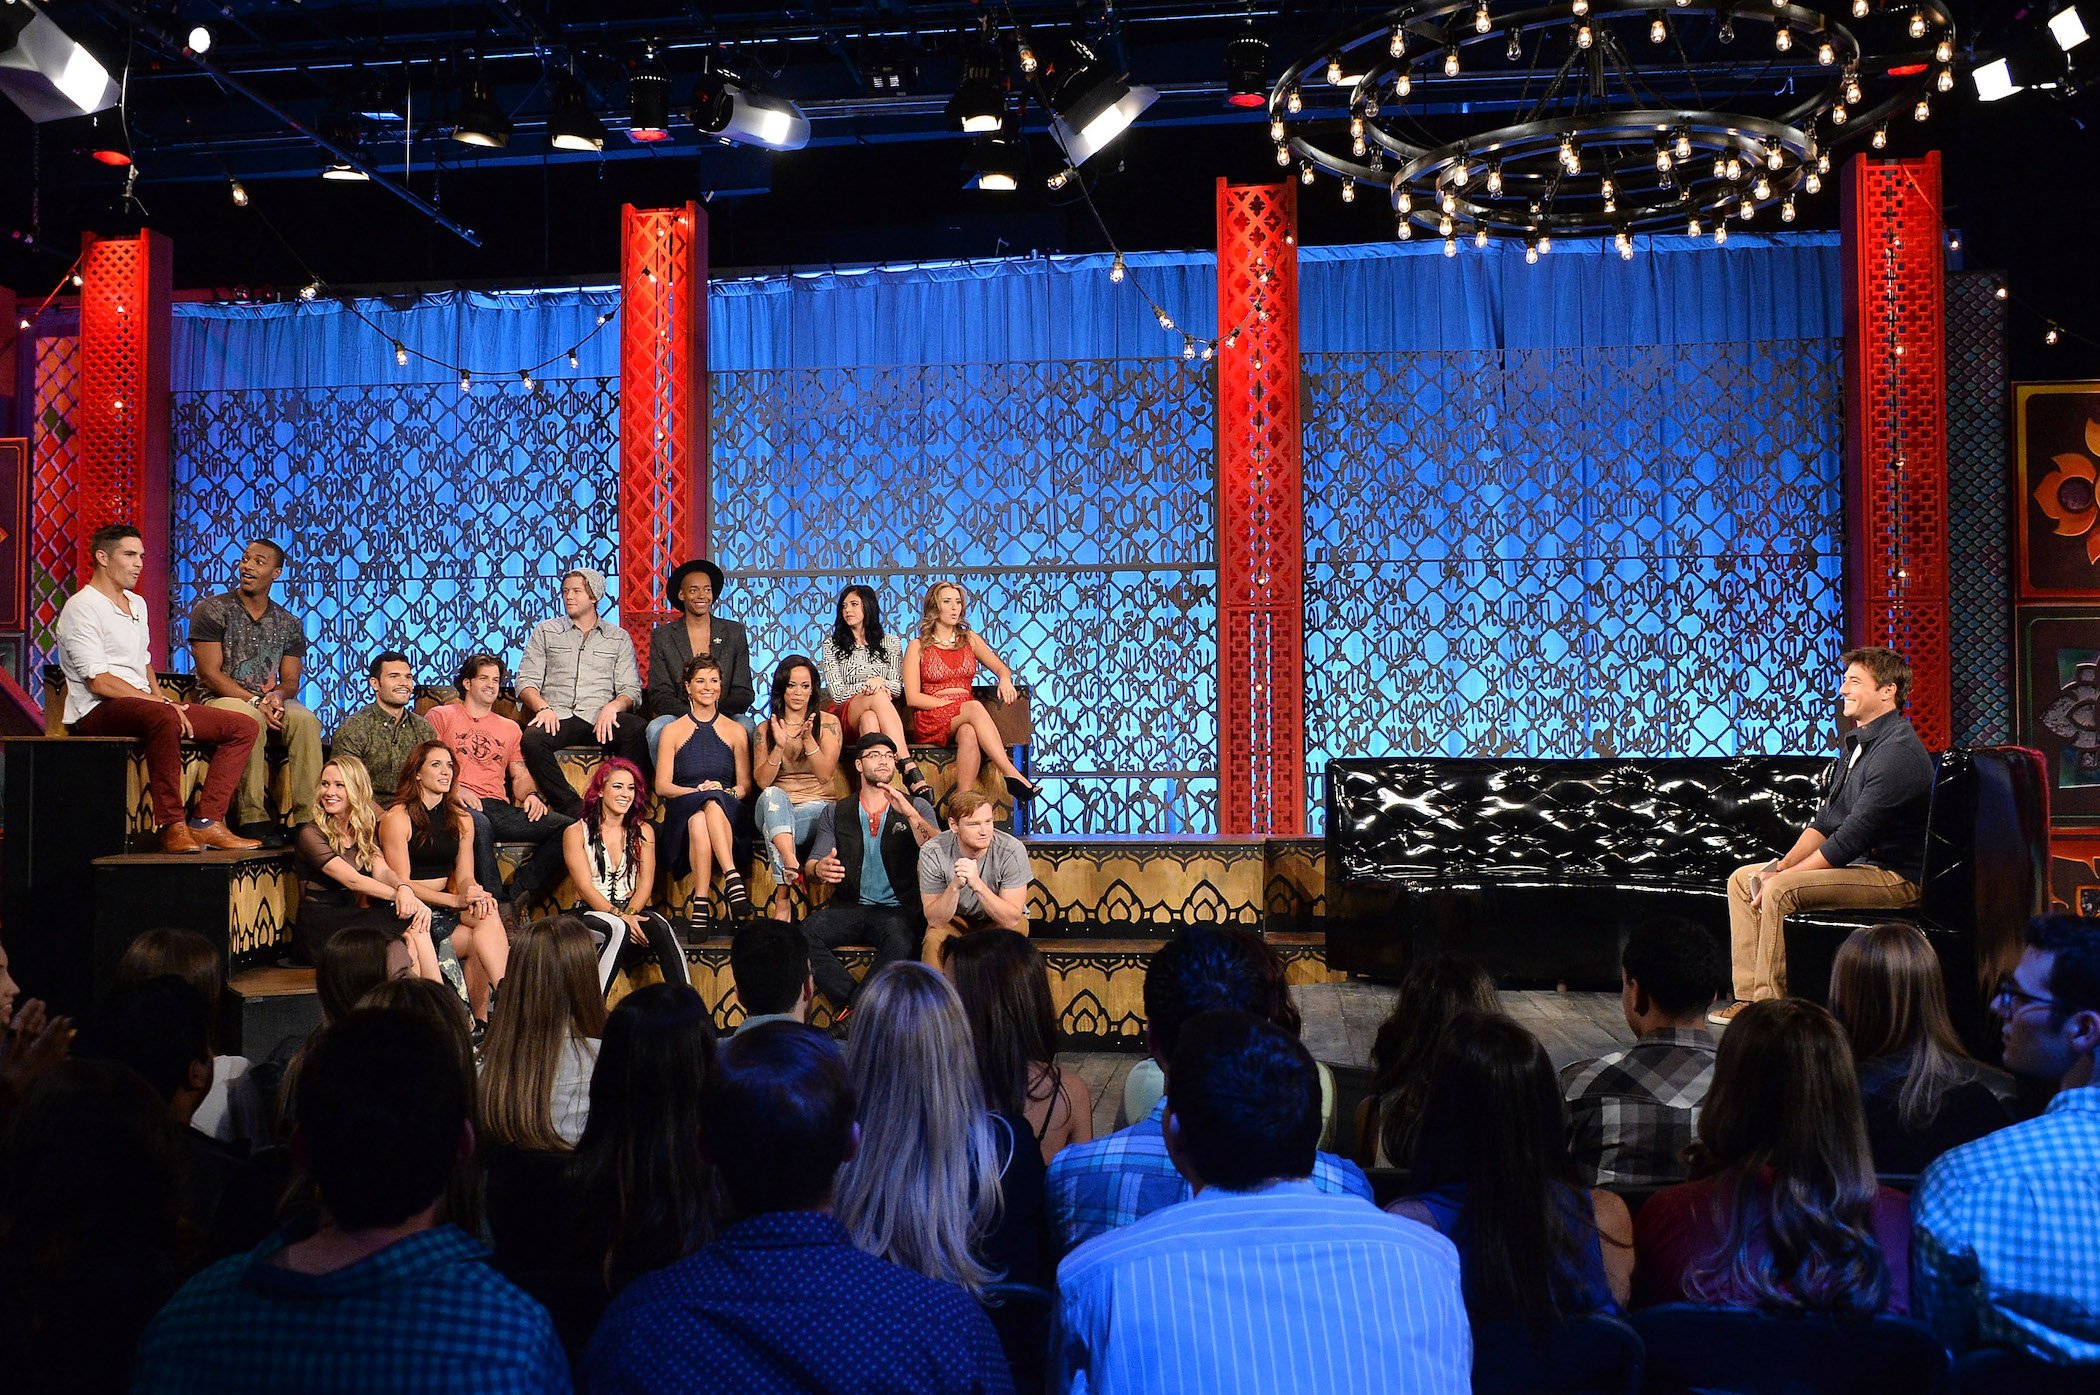 A far shot of MTV's 'The Challenge' players sitting on stage for the reunion special. Some of the players on stage competed on MTV's 'The Challenge' Season 37 